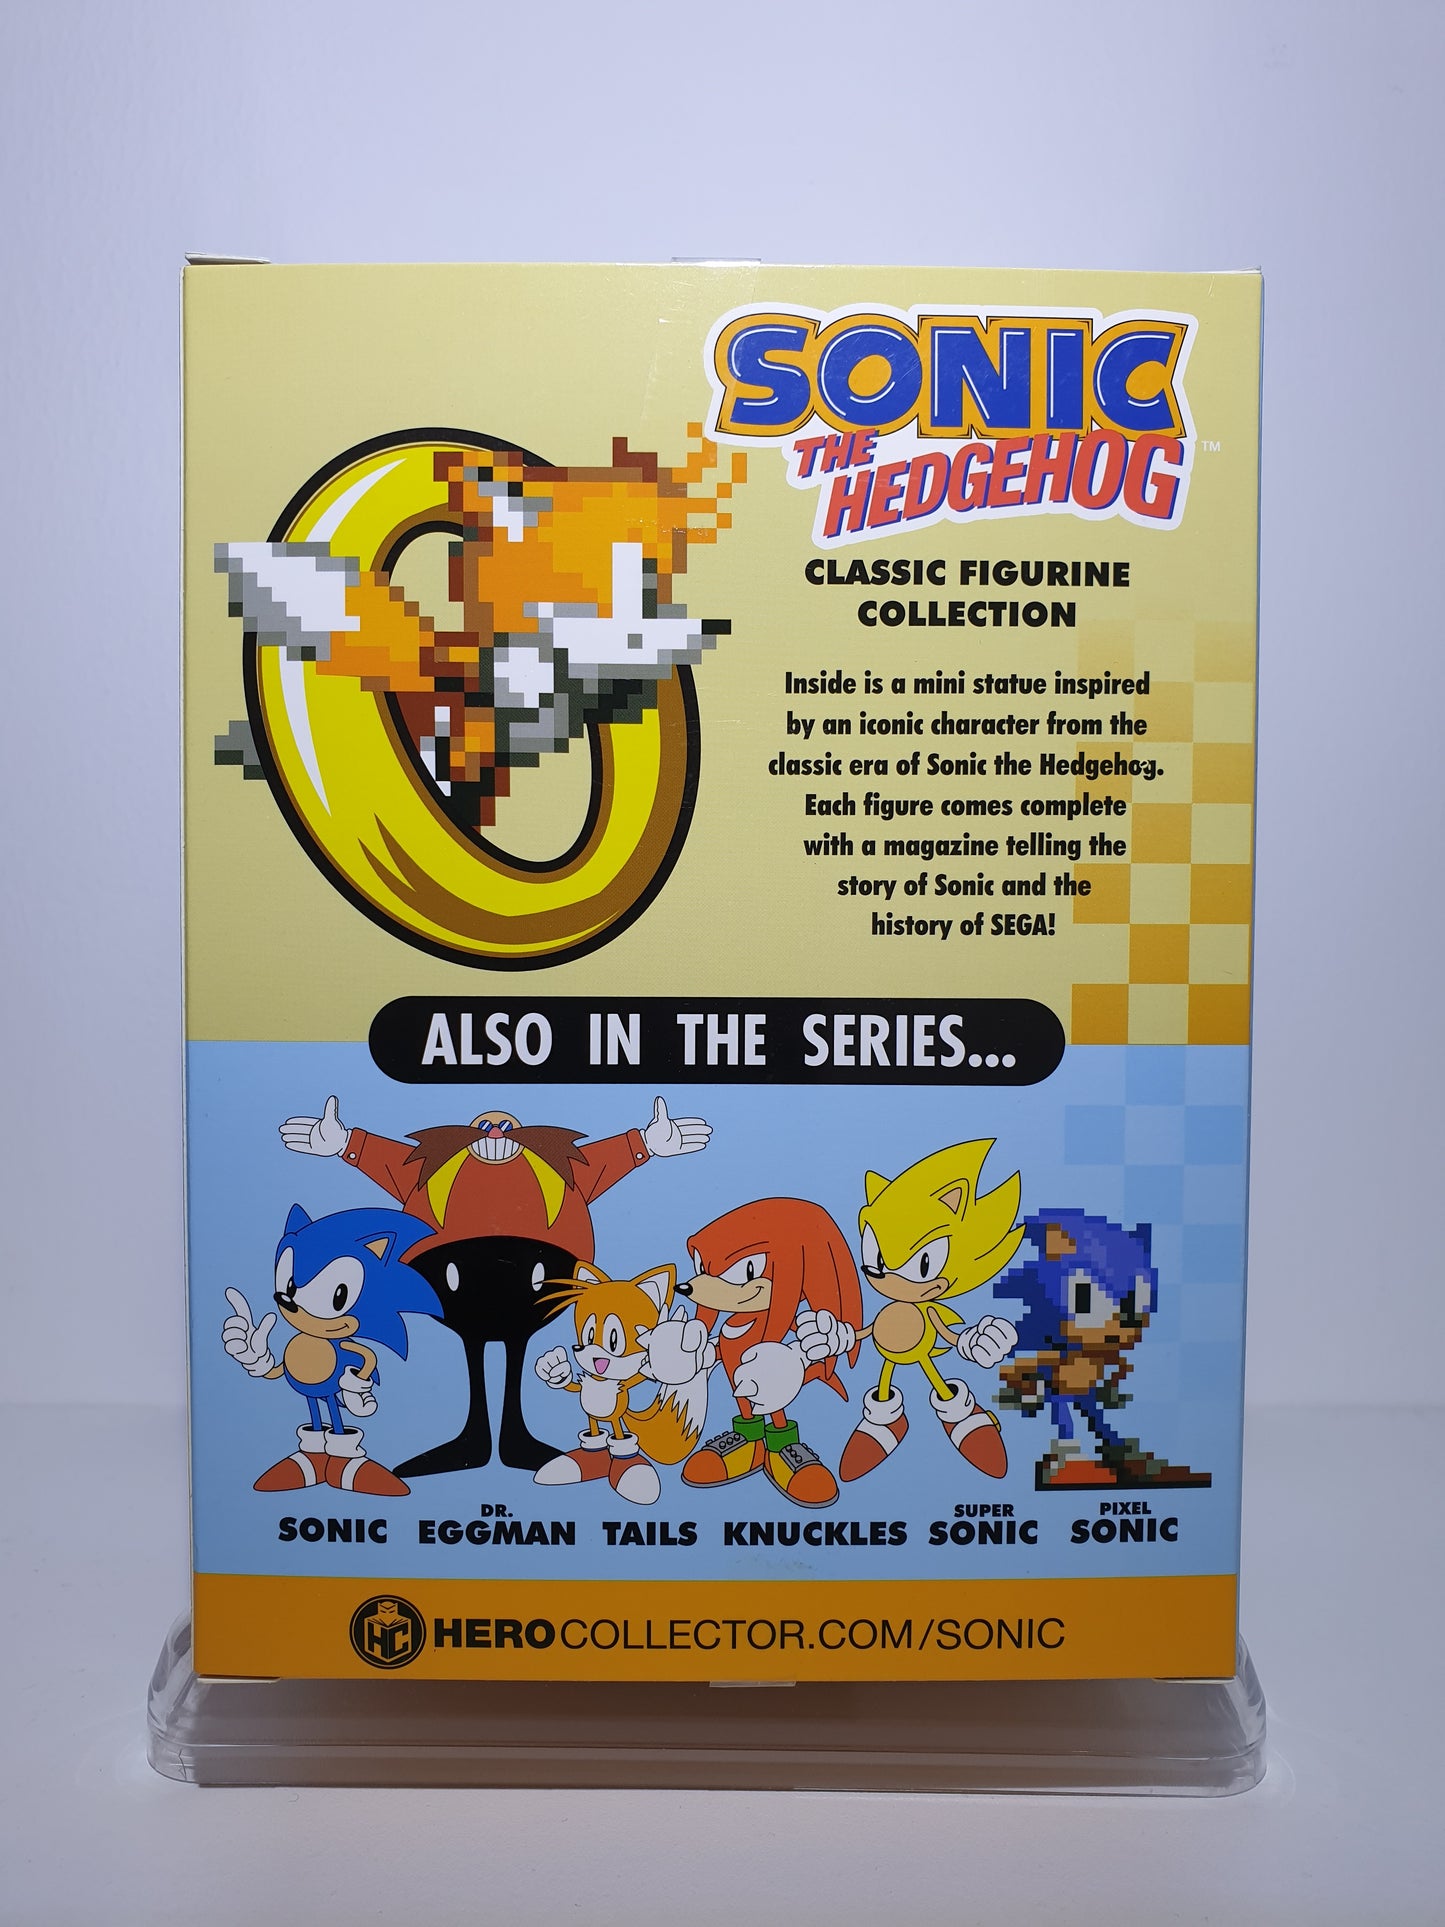 Sonic the Hedgehog - Hero Collector - Pixel Tails - Neuf